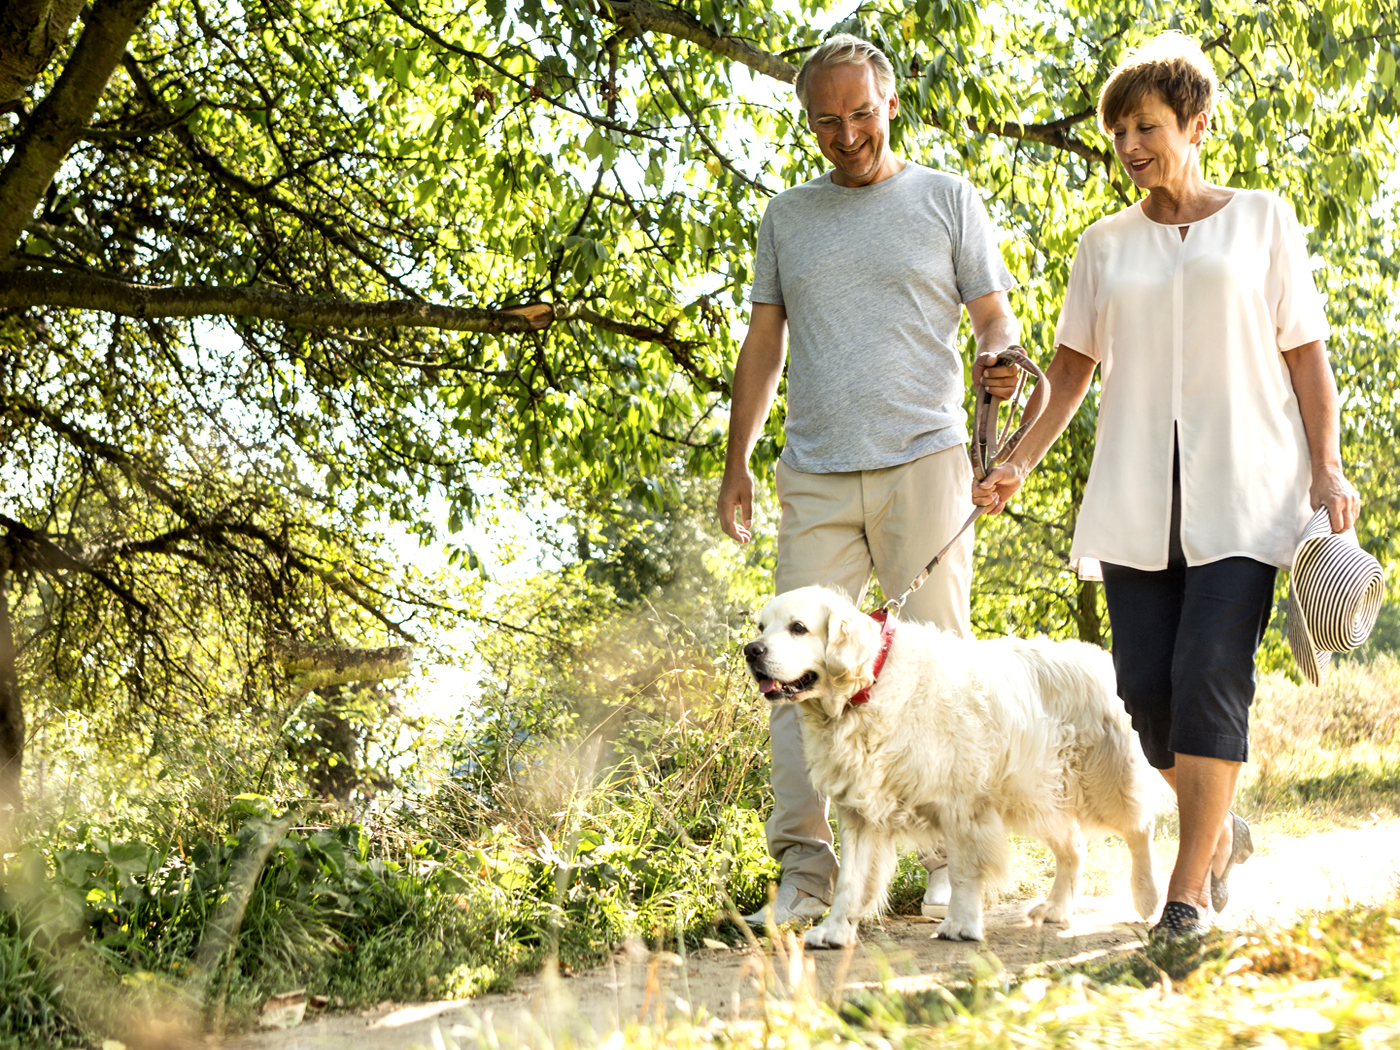 25 Best Health Tips for Older Adults